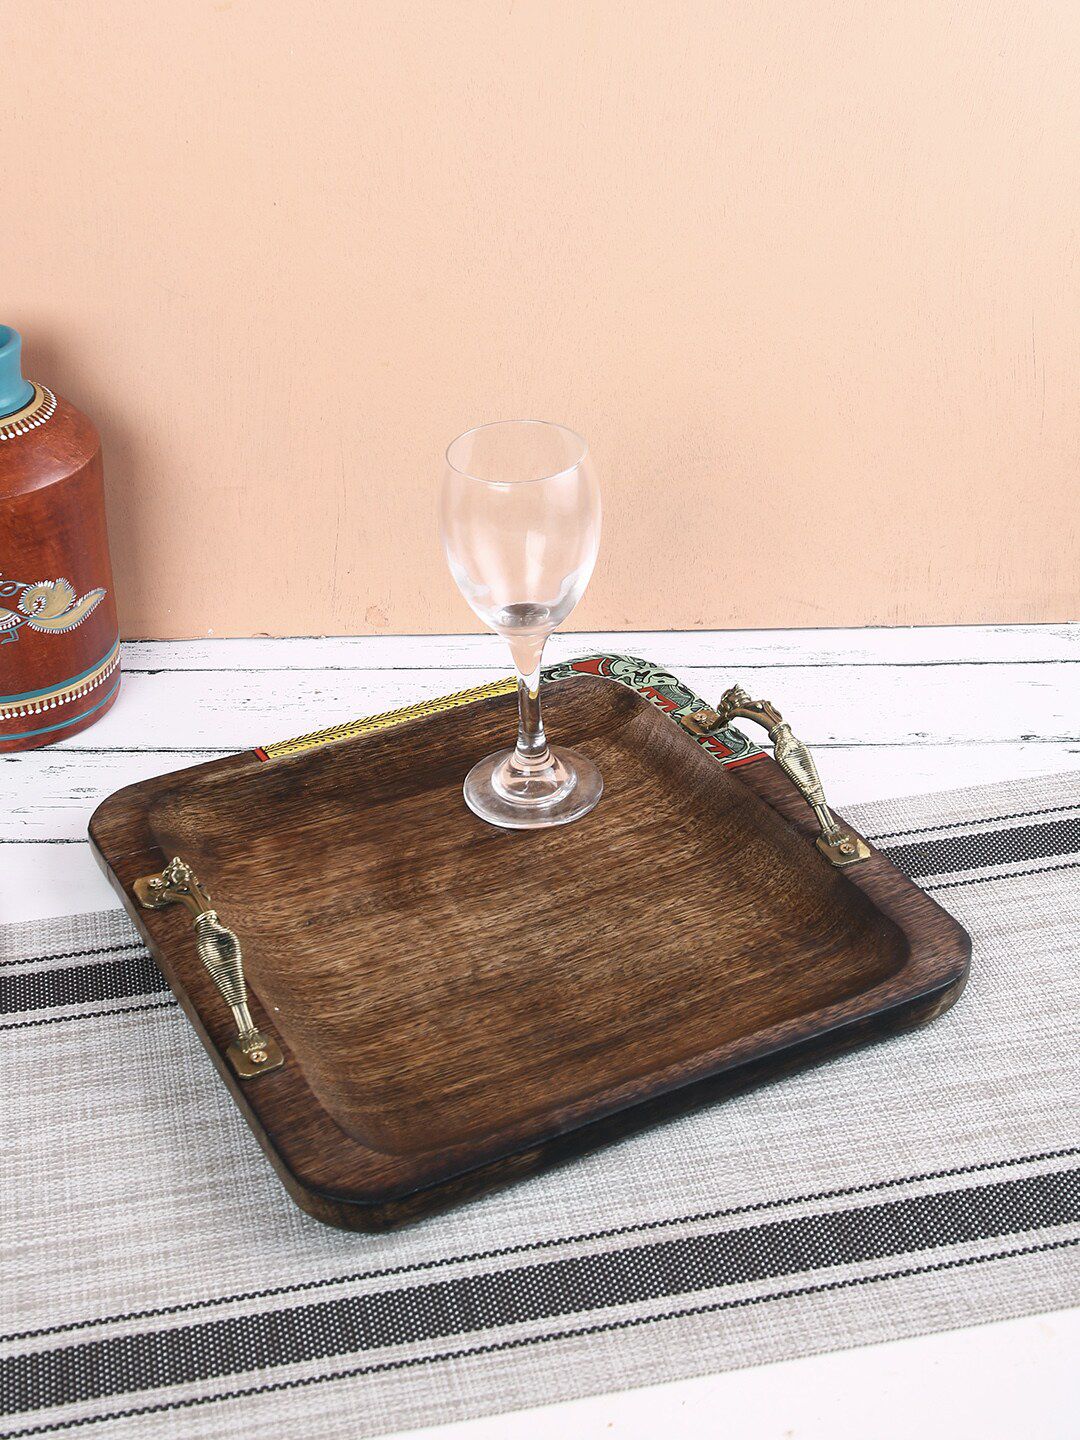 Aapno Rajasthan Brown Quadrilateral Tray With Designer Handles Price in India